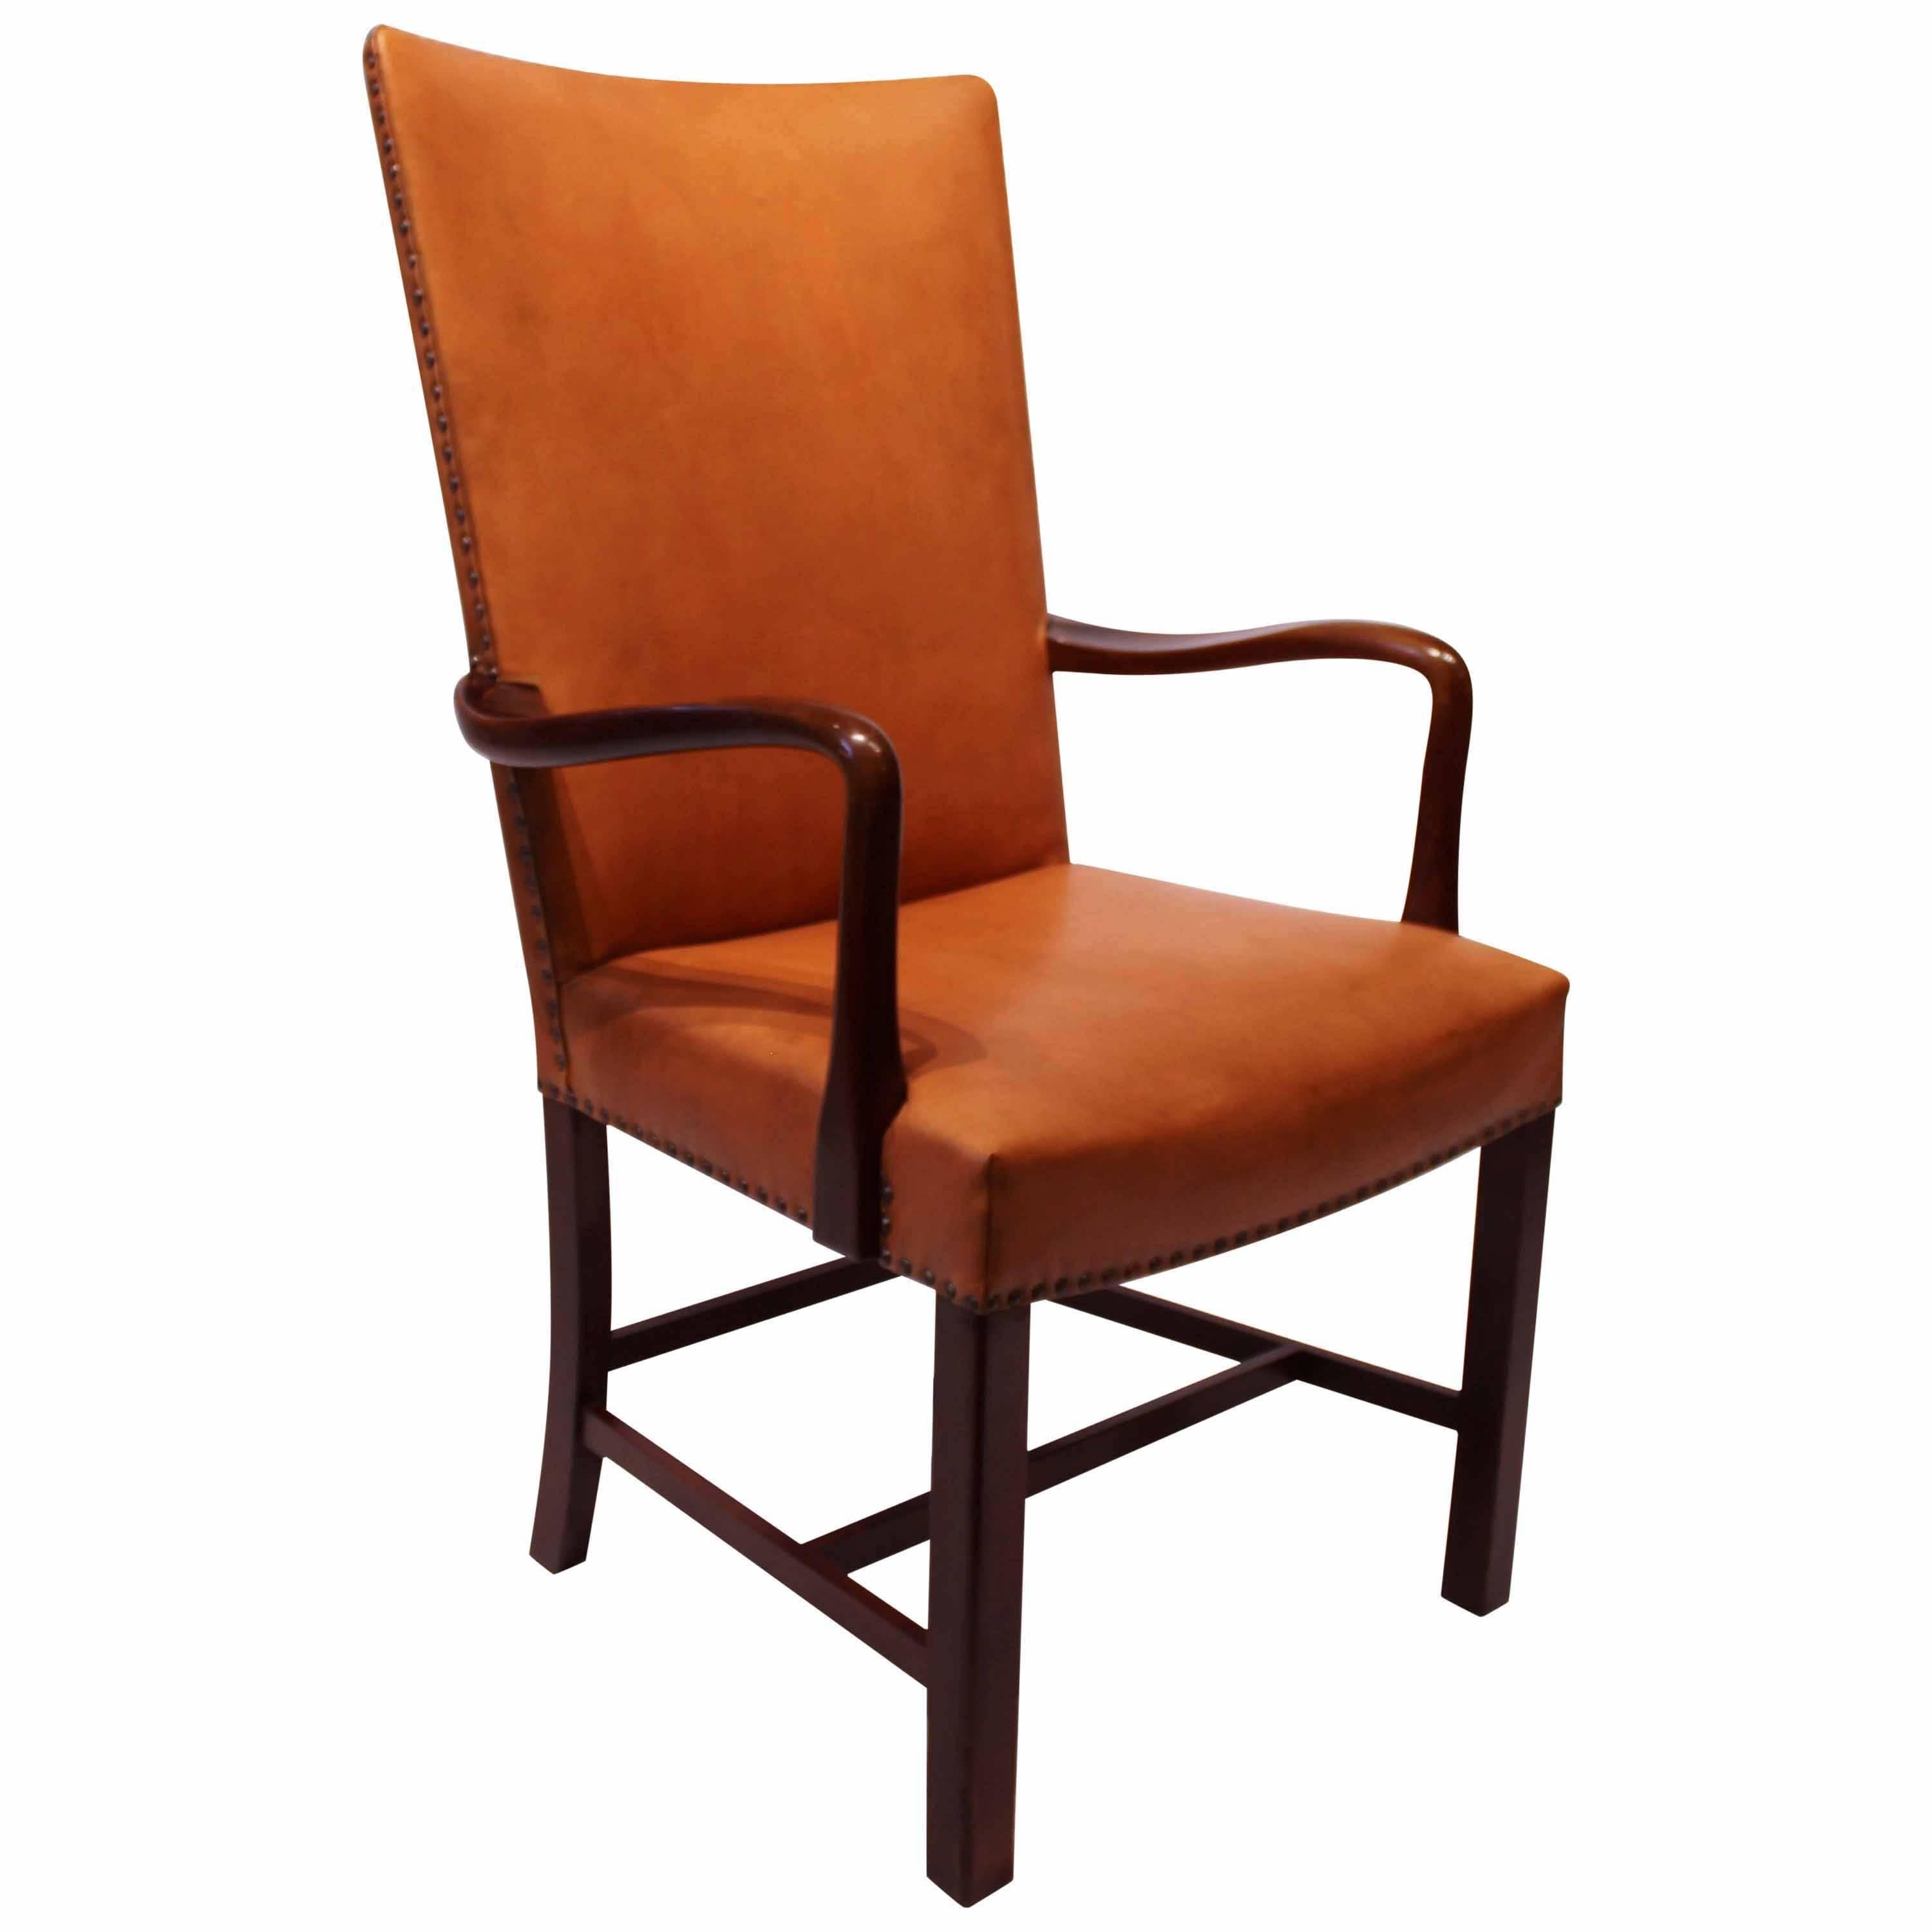 Armchair Upholstered in Cognac Elegance Leather by Fritz Hansen, 1944 For Sale